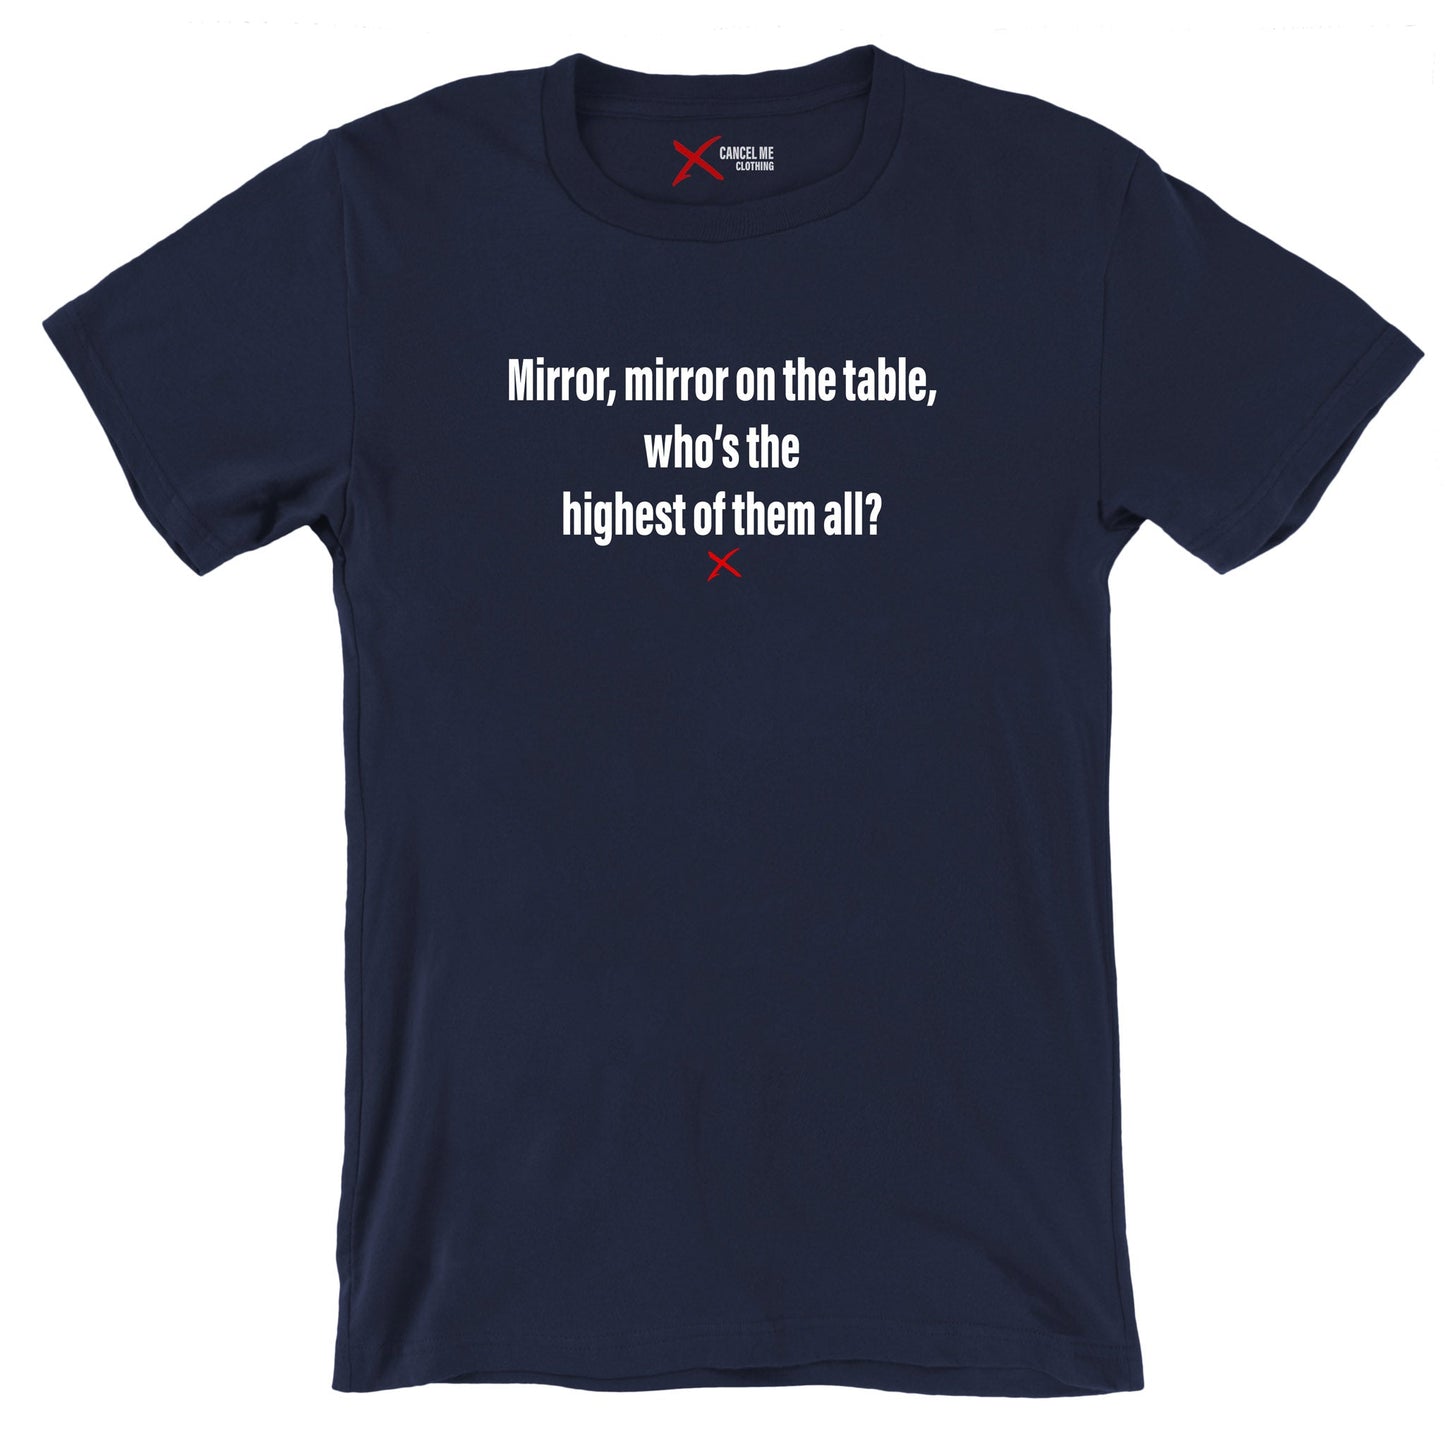 Mirror, mirror on the table, who's the highest of them all? - Shirt